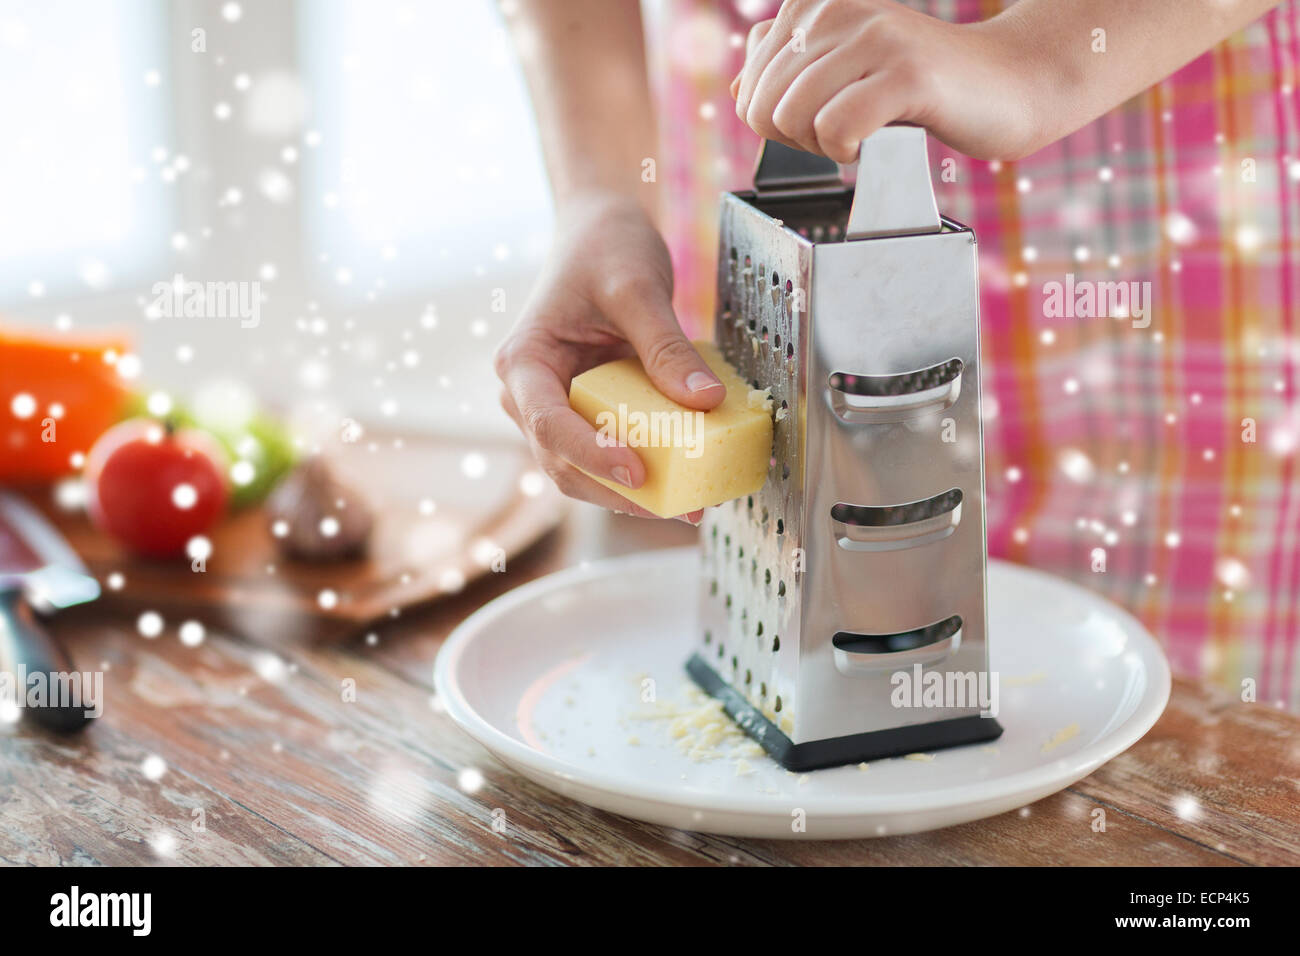 https://c8.alamy.com/comp/ECP4K5/close-up-of-woman-hands-with-grater-grating-cheese-ECP4K5.jpg